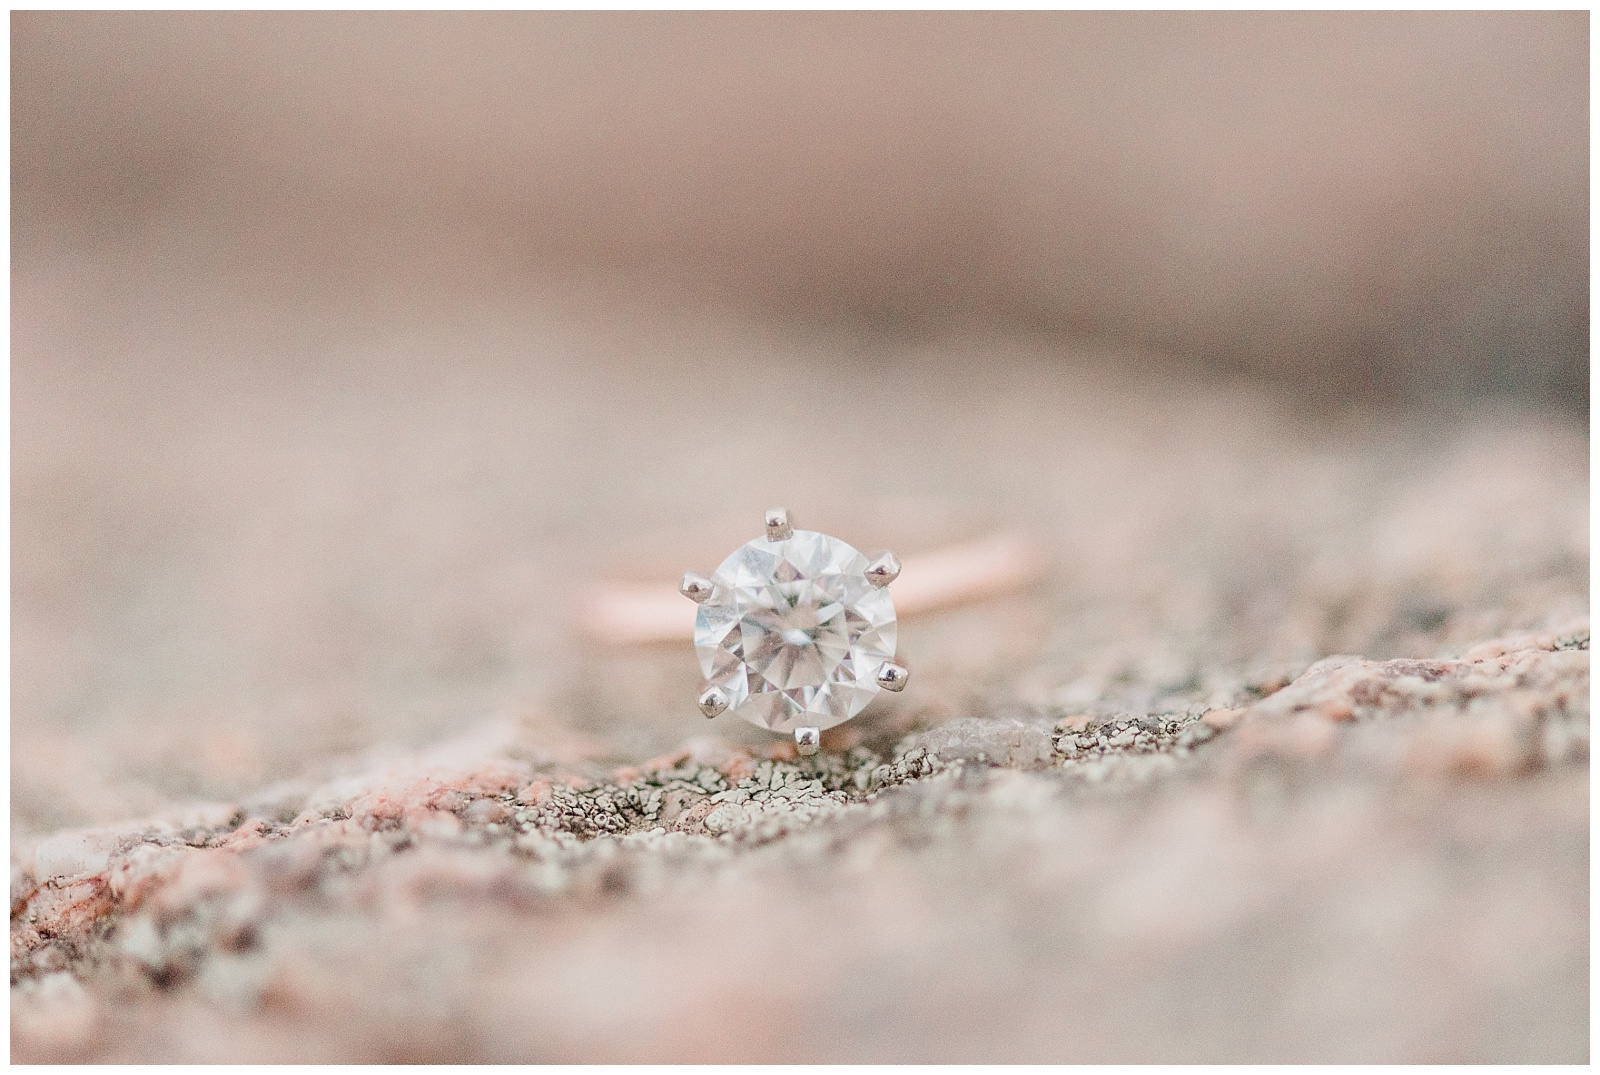 A diamond engagement ring sits on a pink colored rock.